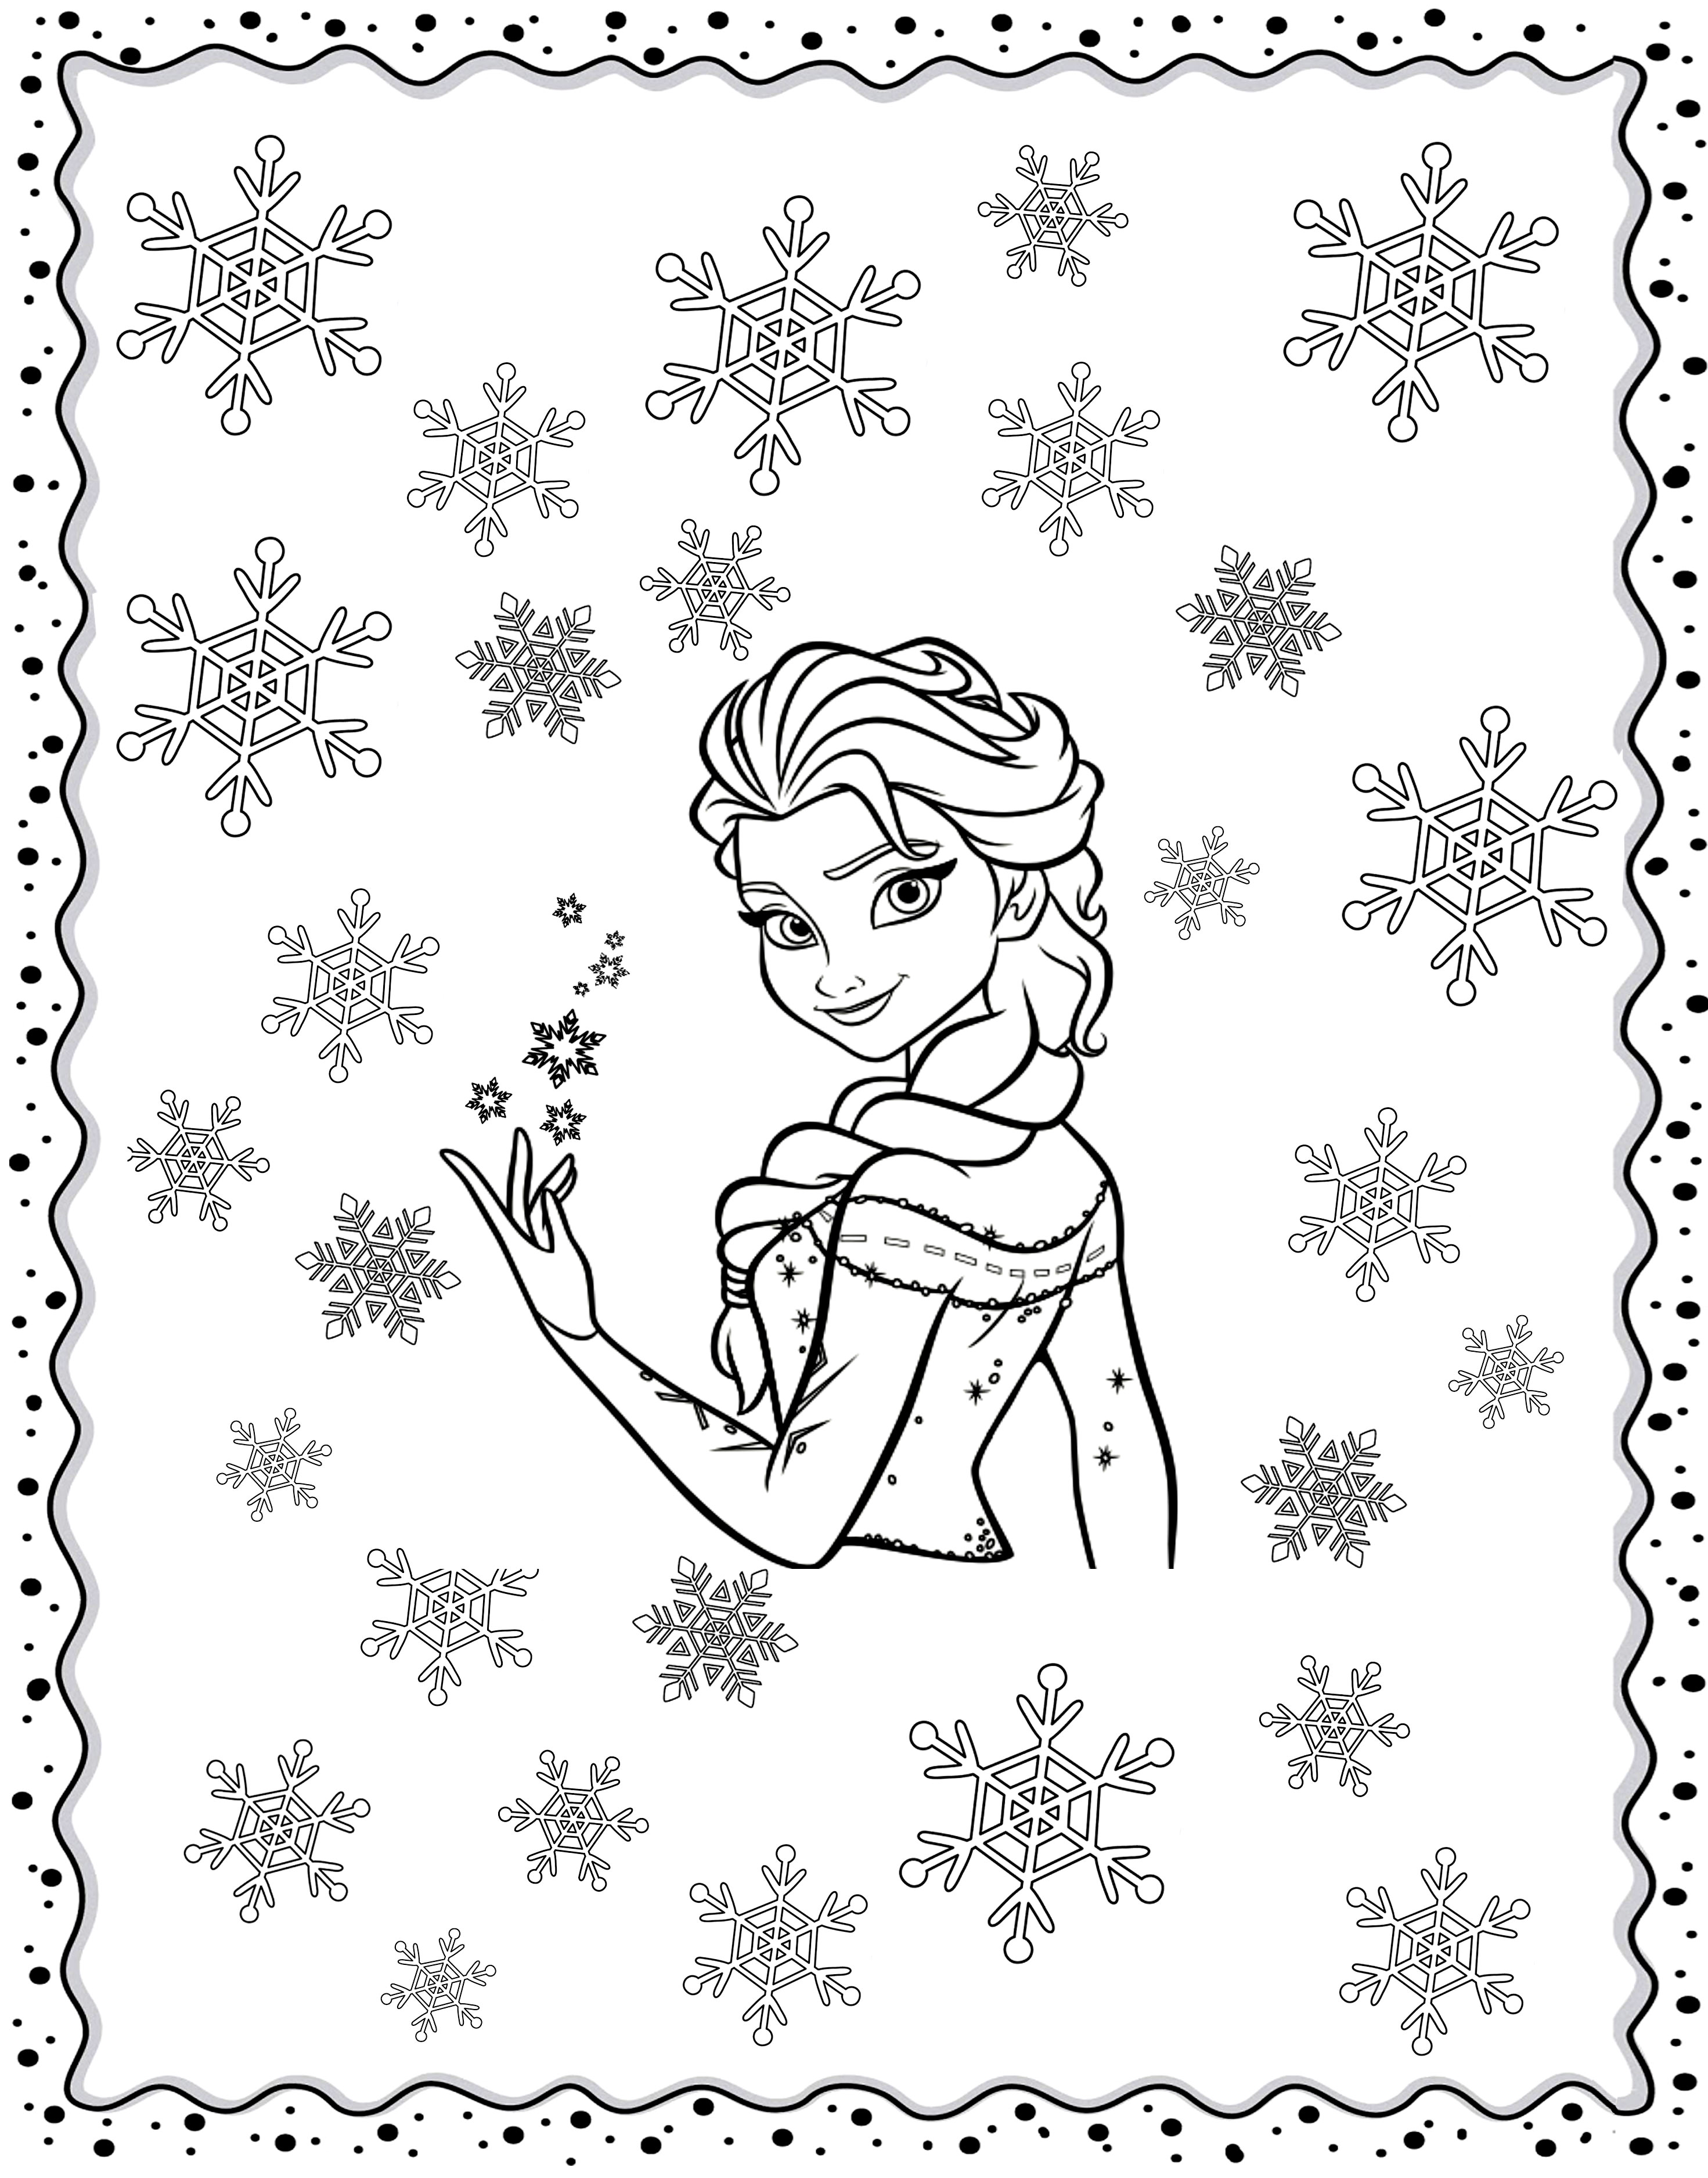 Free Frozen 2 coloring page to download, for children